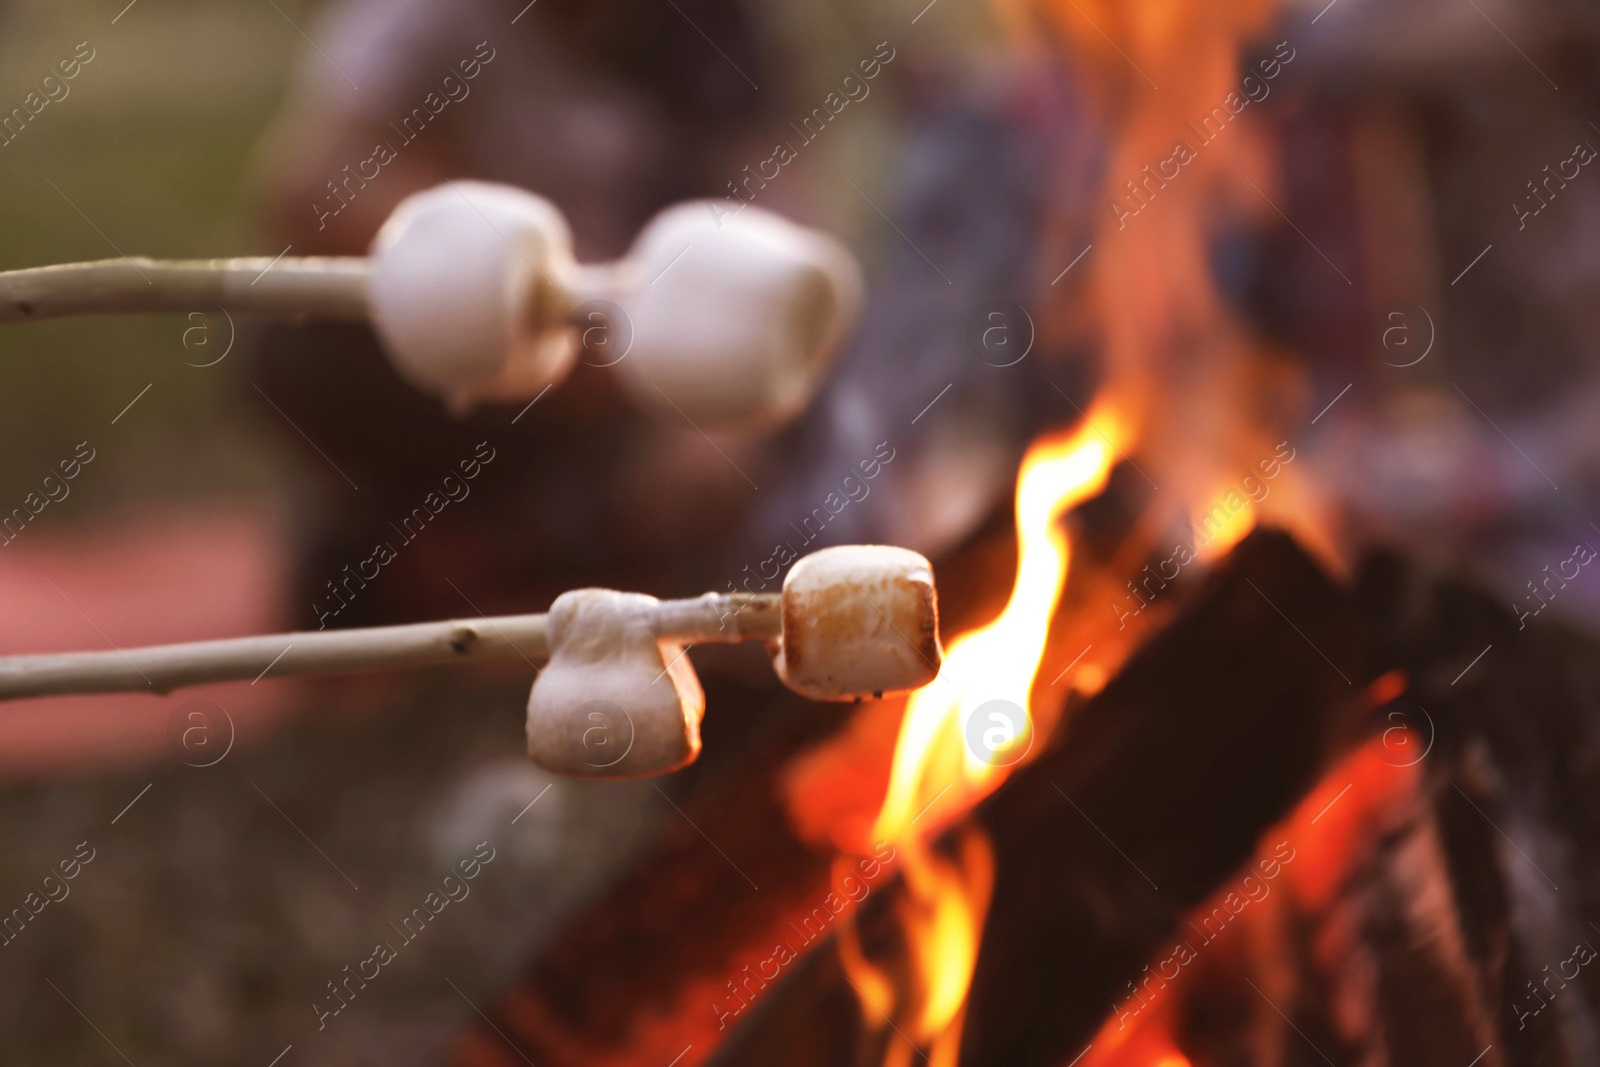 Photo of Fried marshmallows on stick against blurred background, closeup. Summer camp